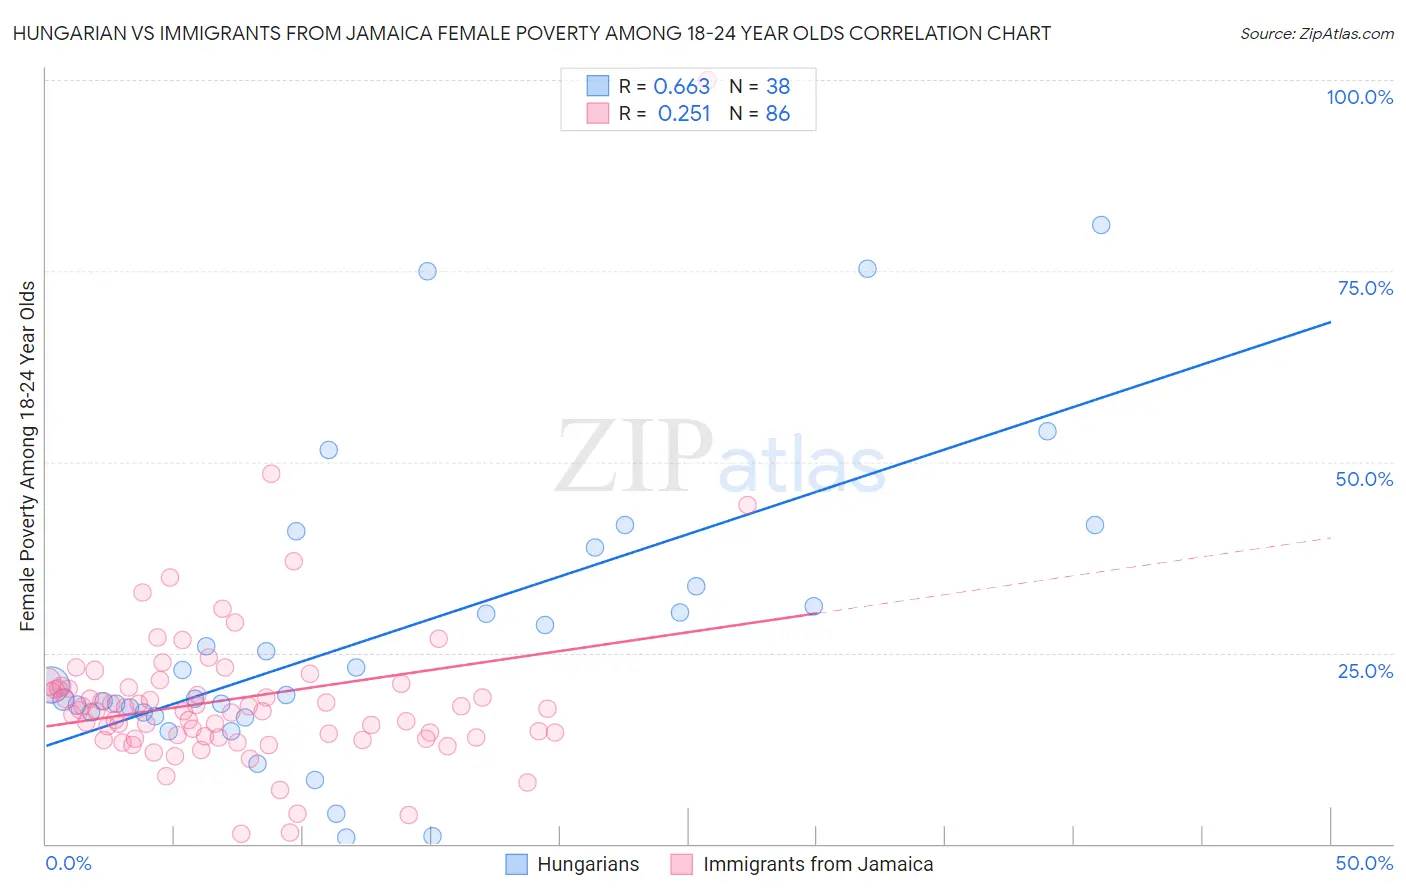 Hungarian vs Immigrants from Jamaica Female Poverty Among 18-24 Year Olds